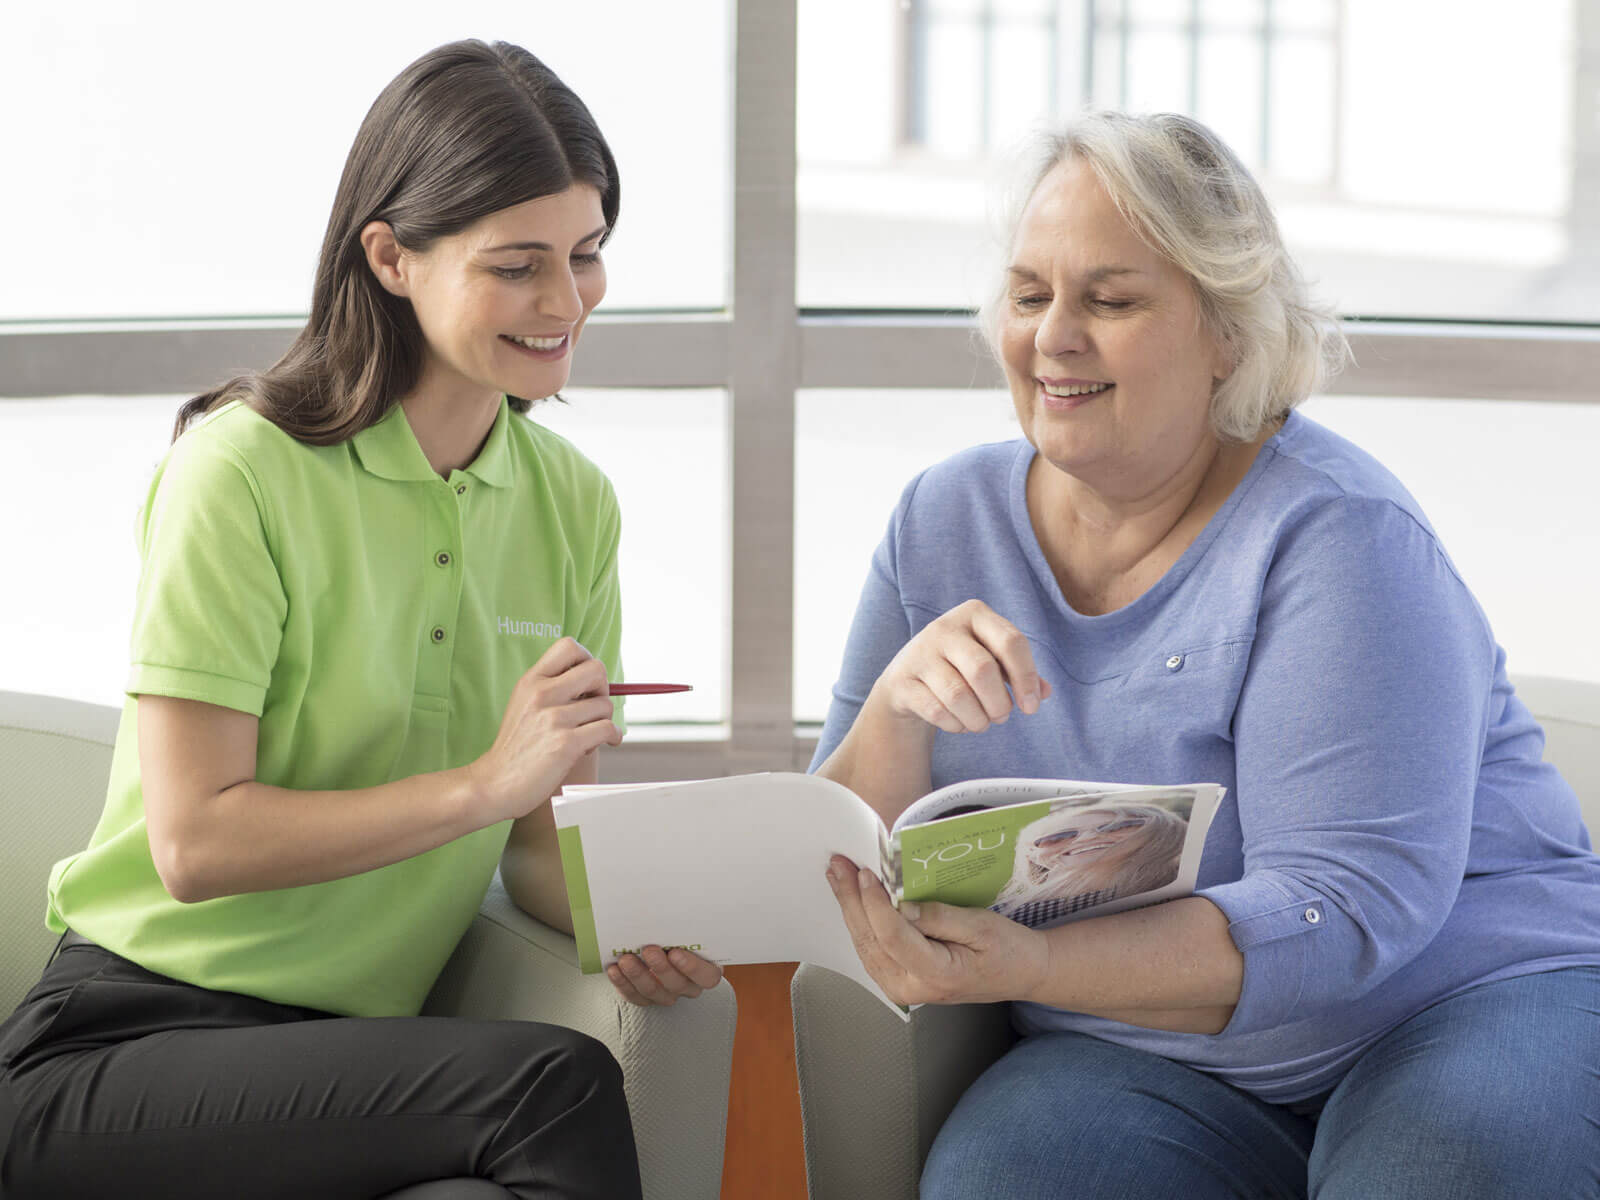 A Humana employee helps a woman understand health insurance plans inside a pamphlet.